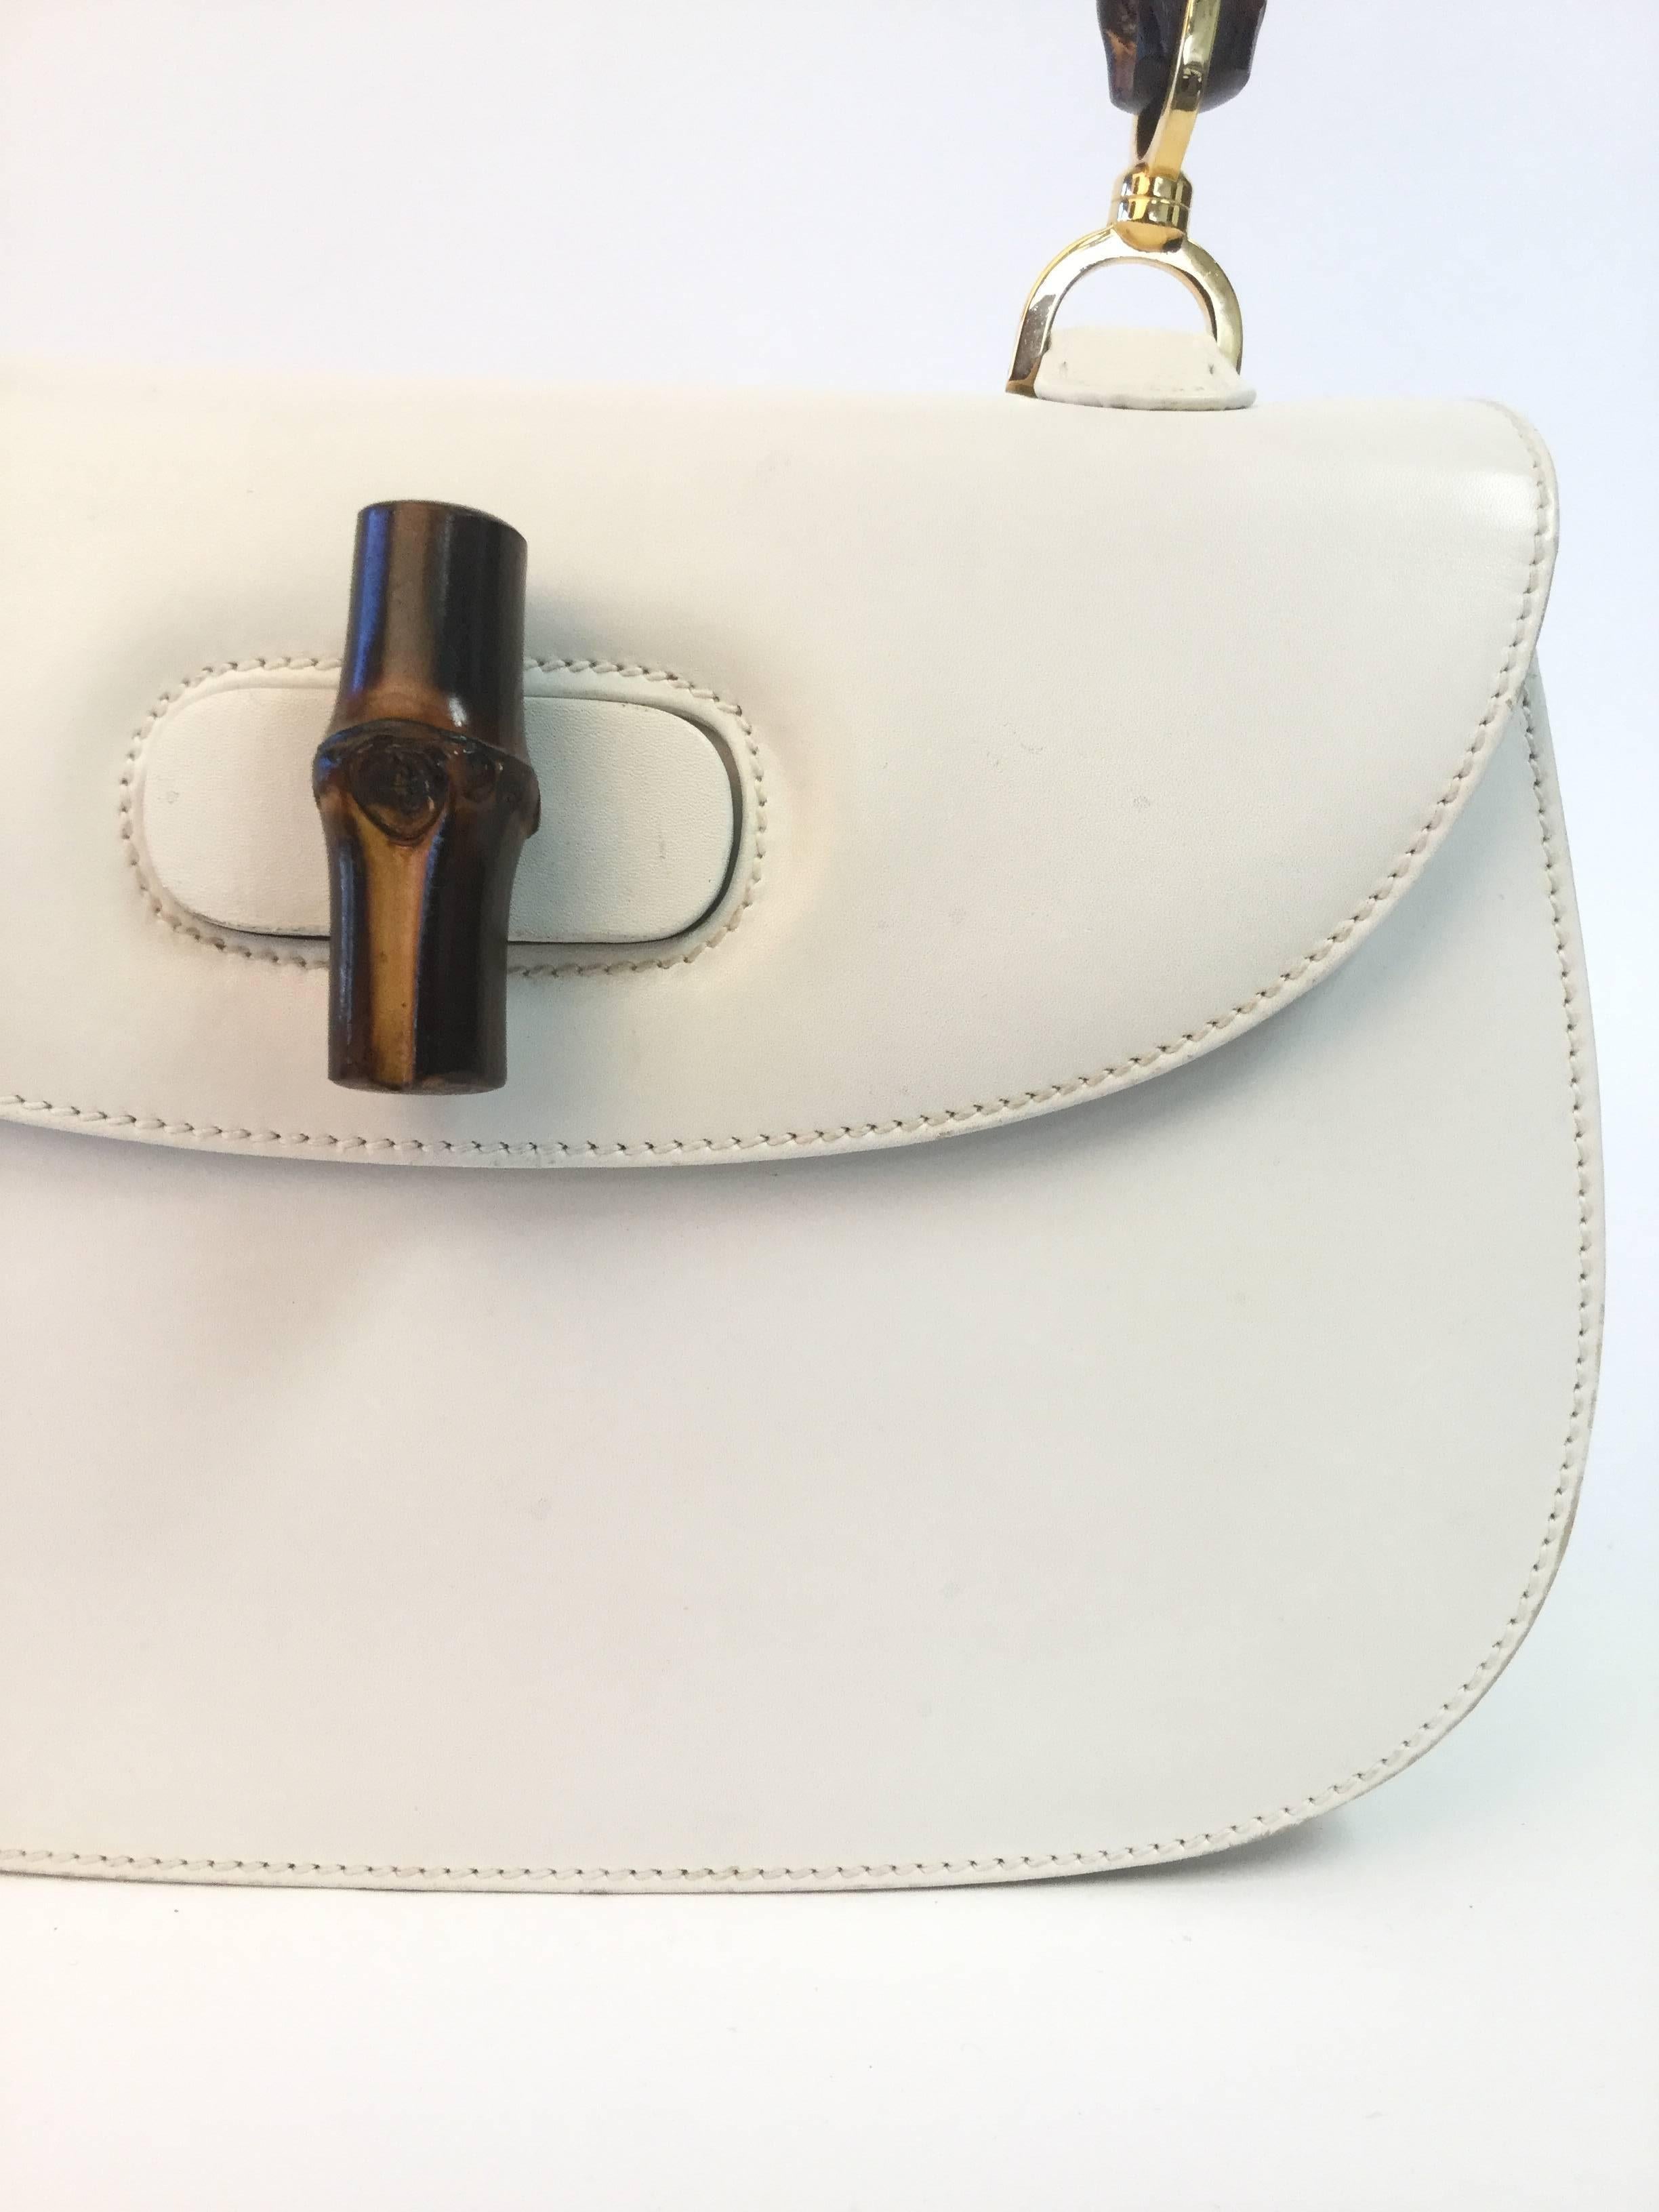 Rare and Iconic!

This gorgeous 1960's handbag in one of Gucci's most famous designs! The white leather purse has a saddlebag construction with a flap that lays over the front of the purse. The espresso bamboo handle of the purse curves gently from